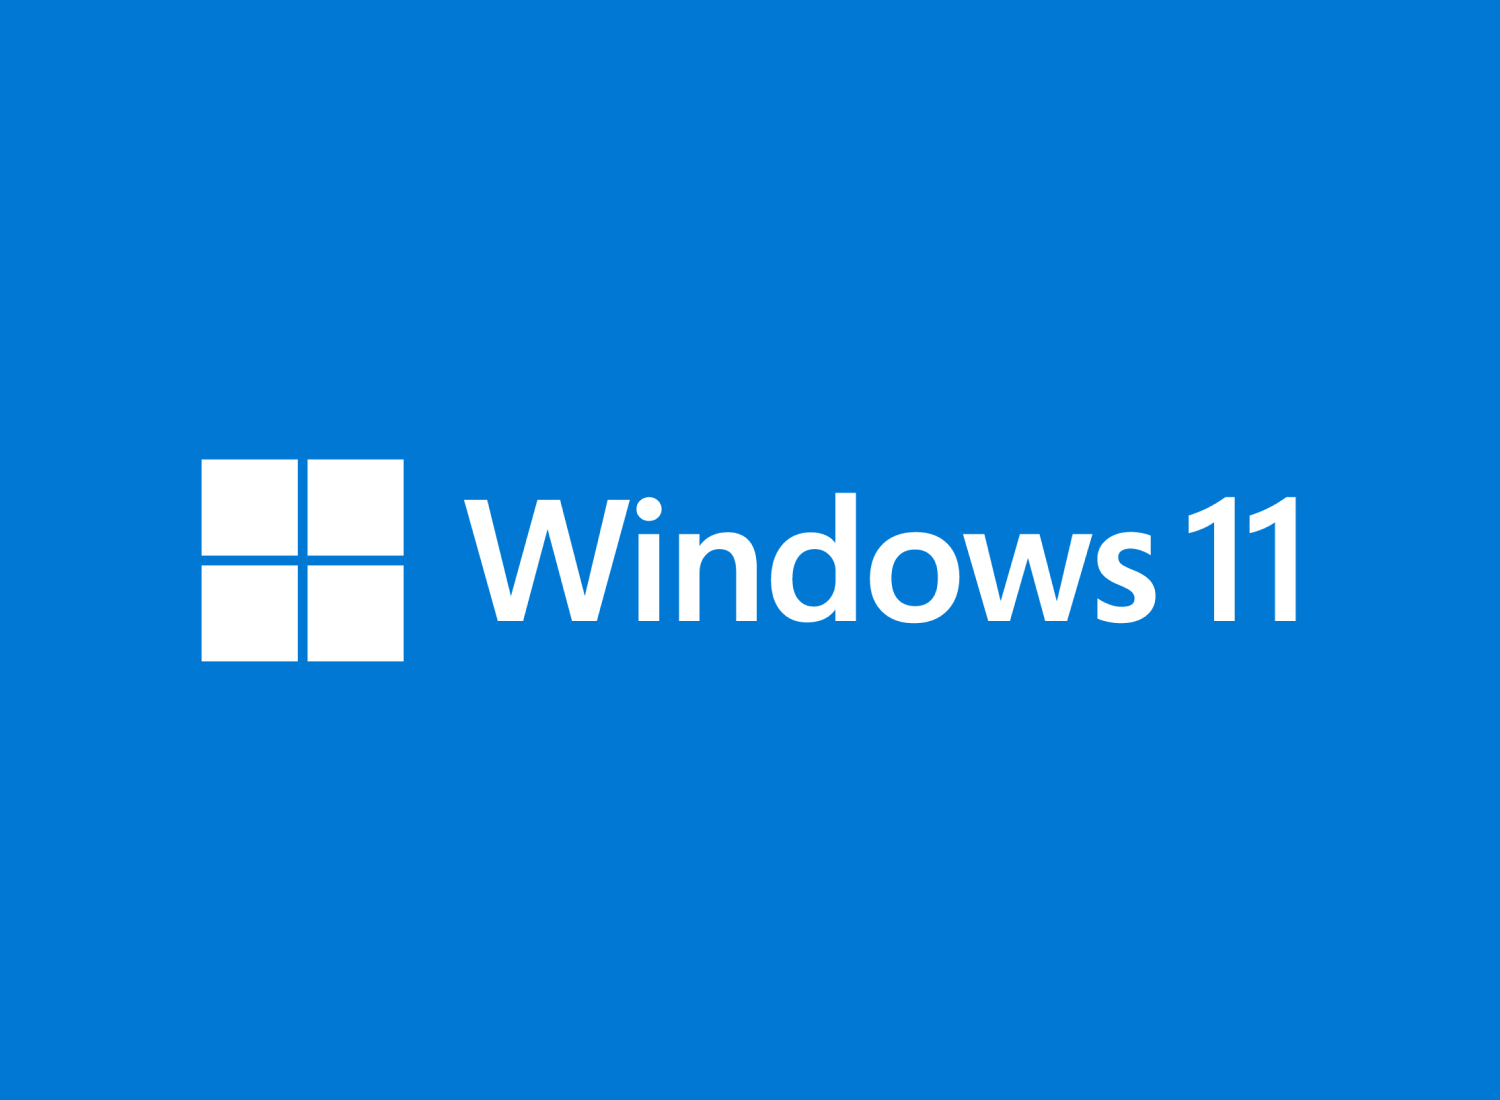 Releasing Windows 11 Build 22621.169 to the Release Preview Channel